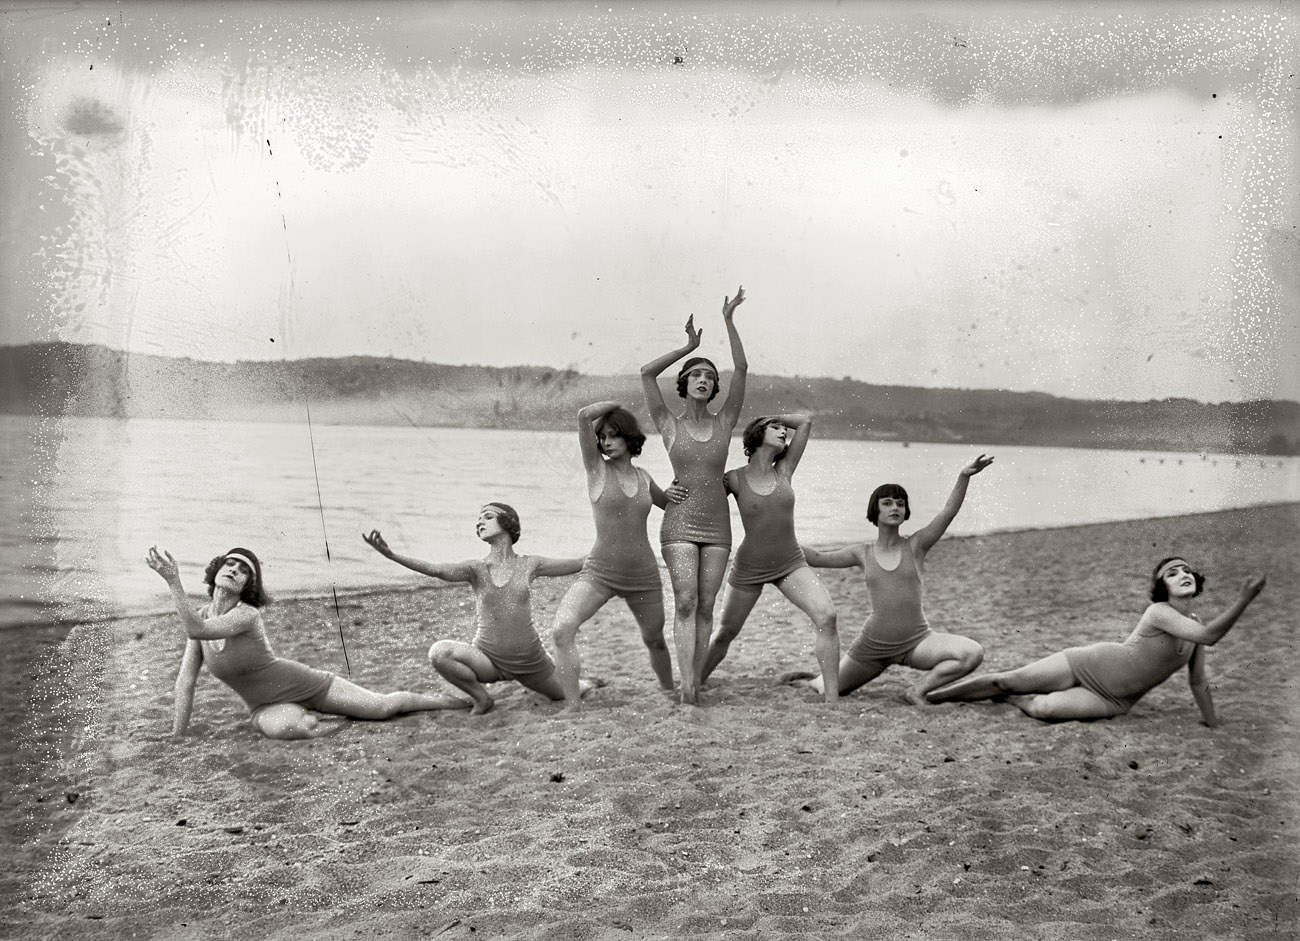 The Denishawn Dancers circa 1920. View full size. G.G. Bain Collection.